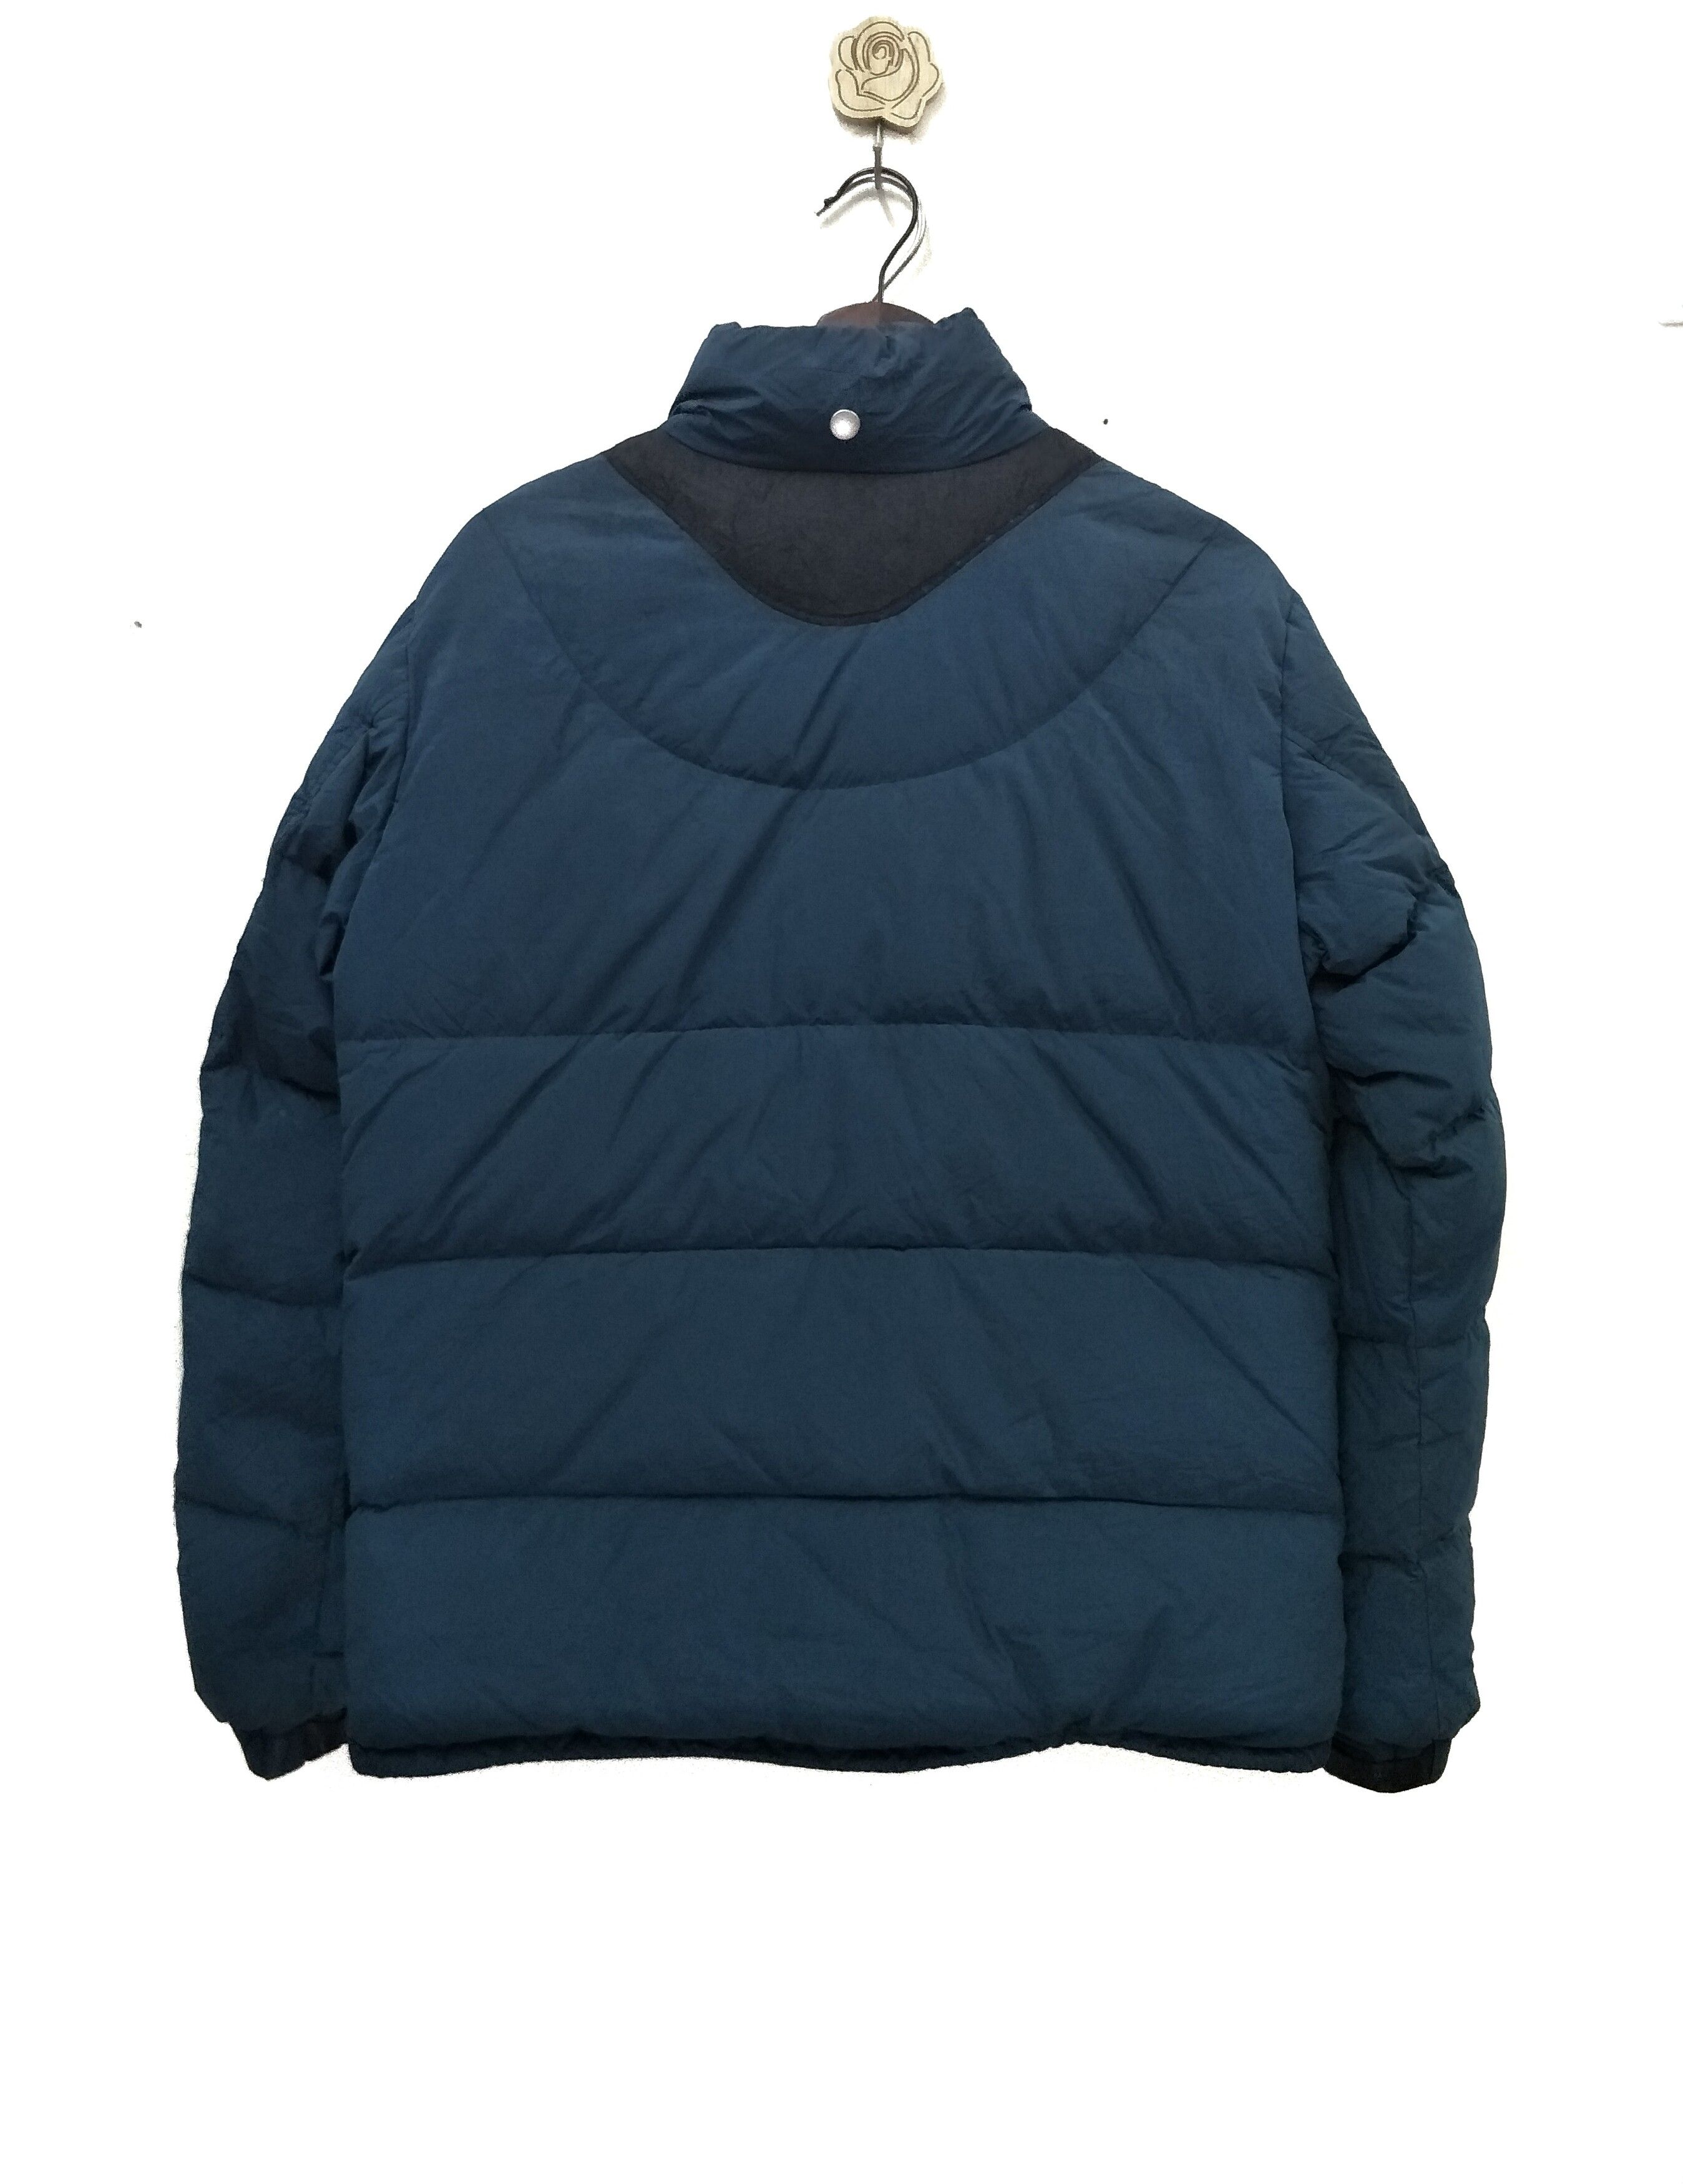 Undercover x Uniqlo Puffer Down Jacket - 2